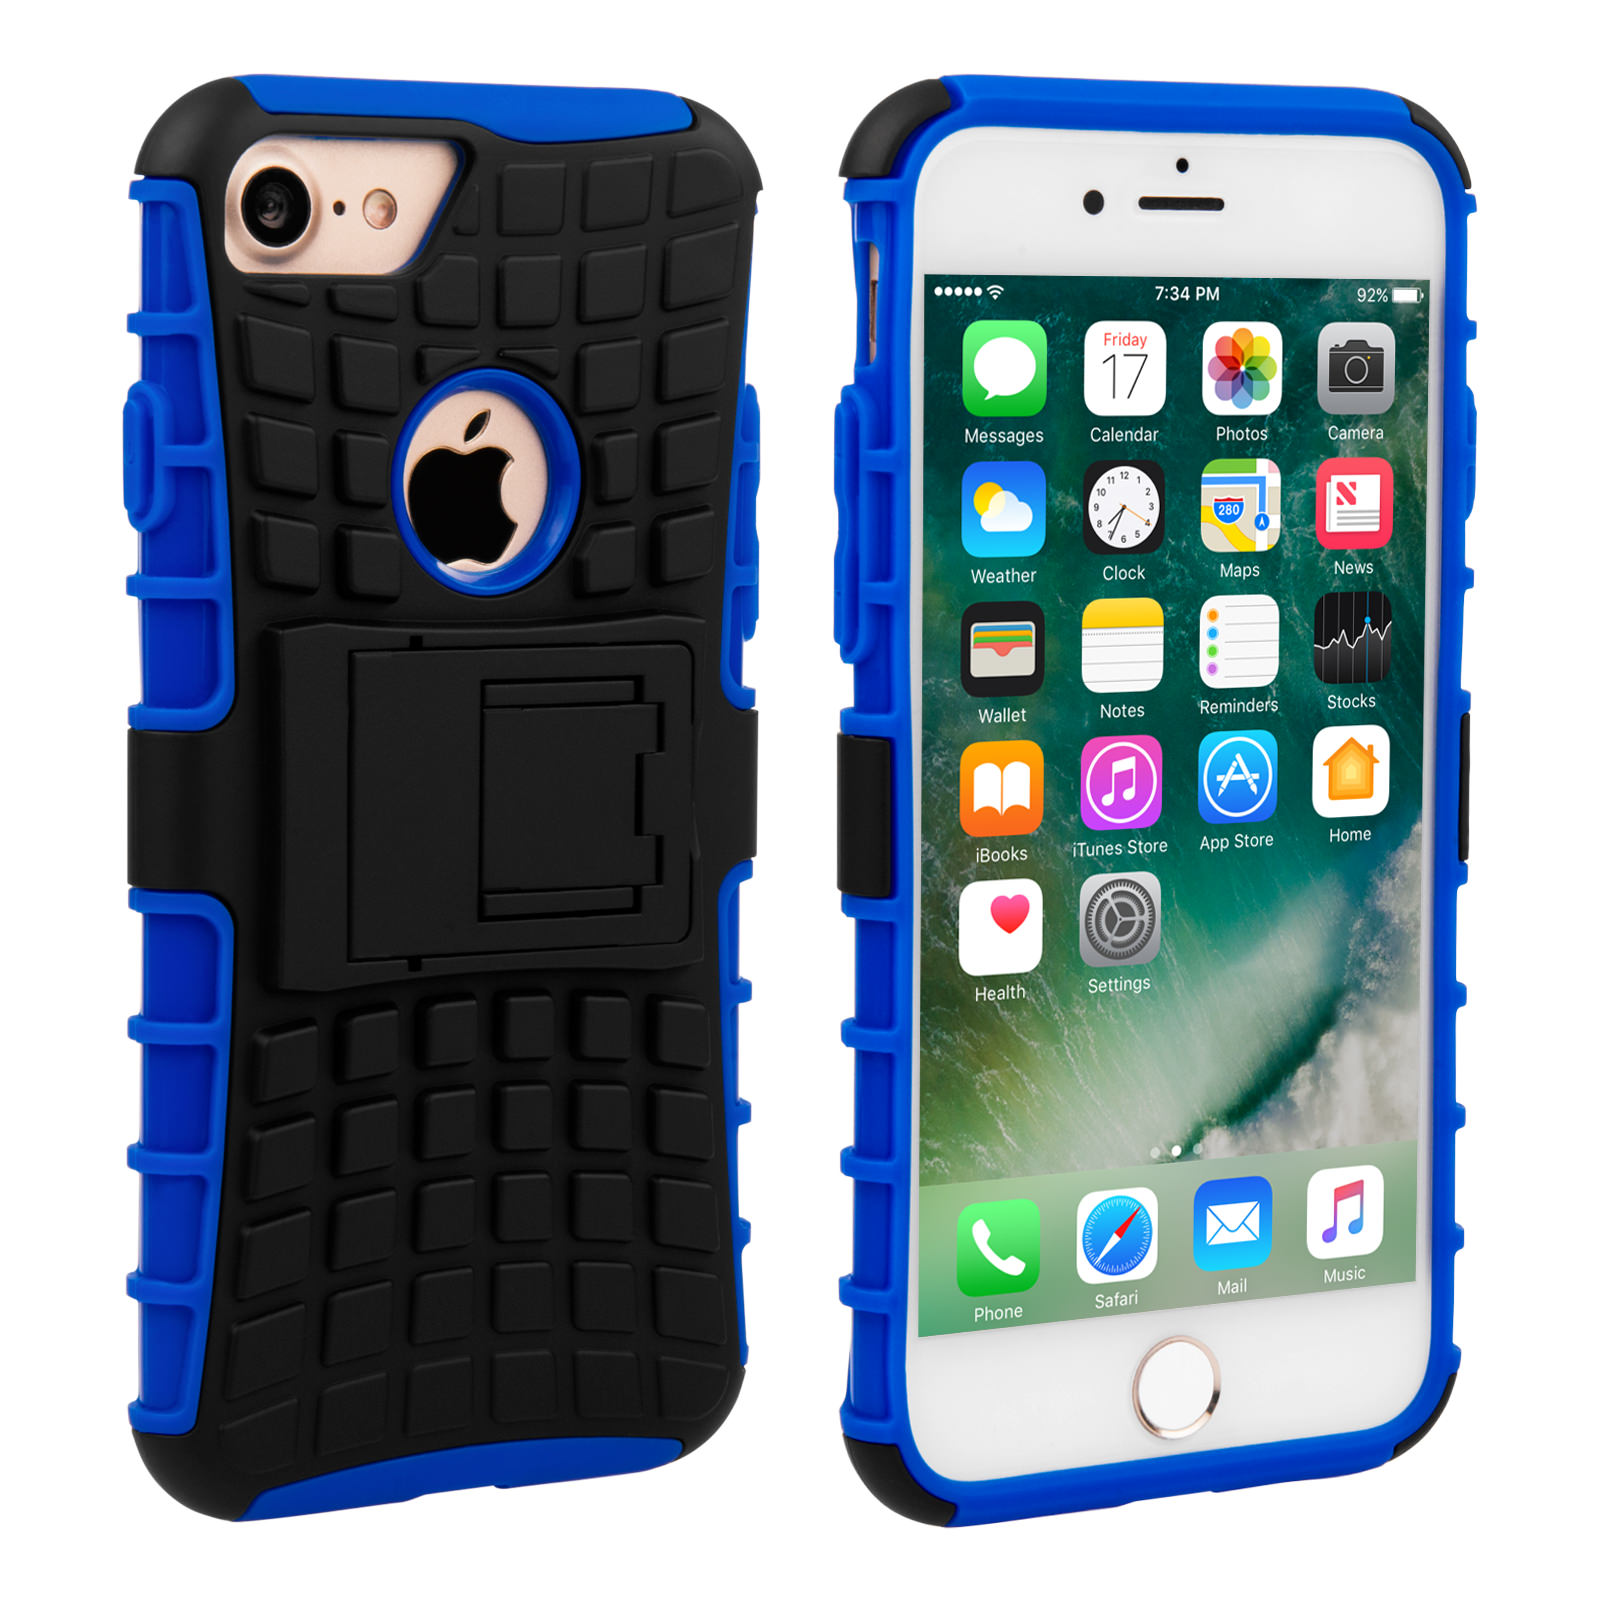 YouSave iPhone 7 Kickstand Combo Case - Blue